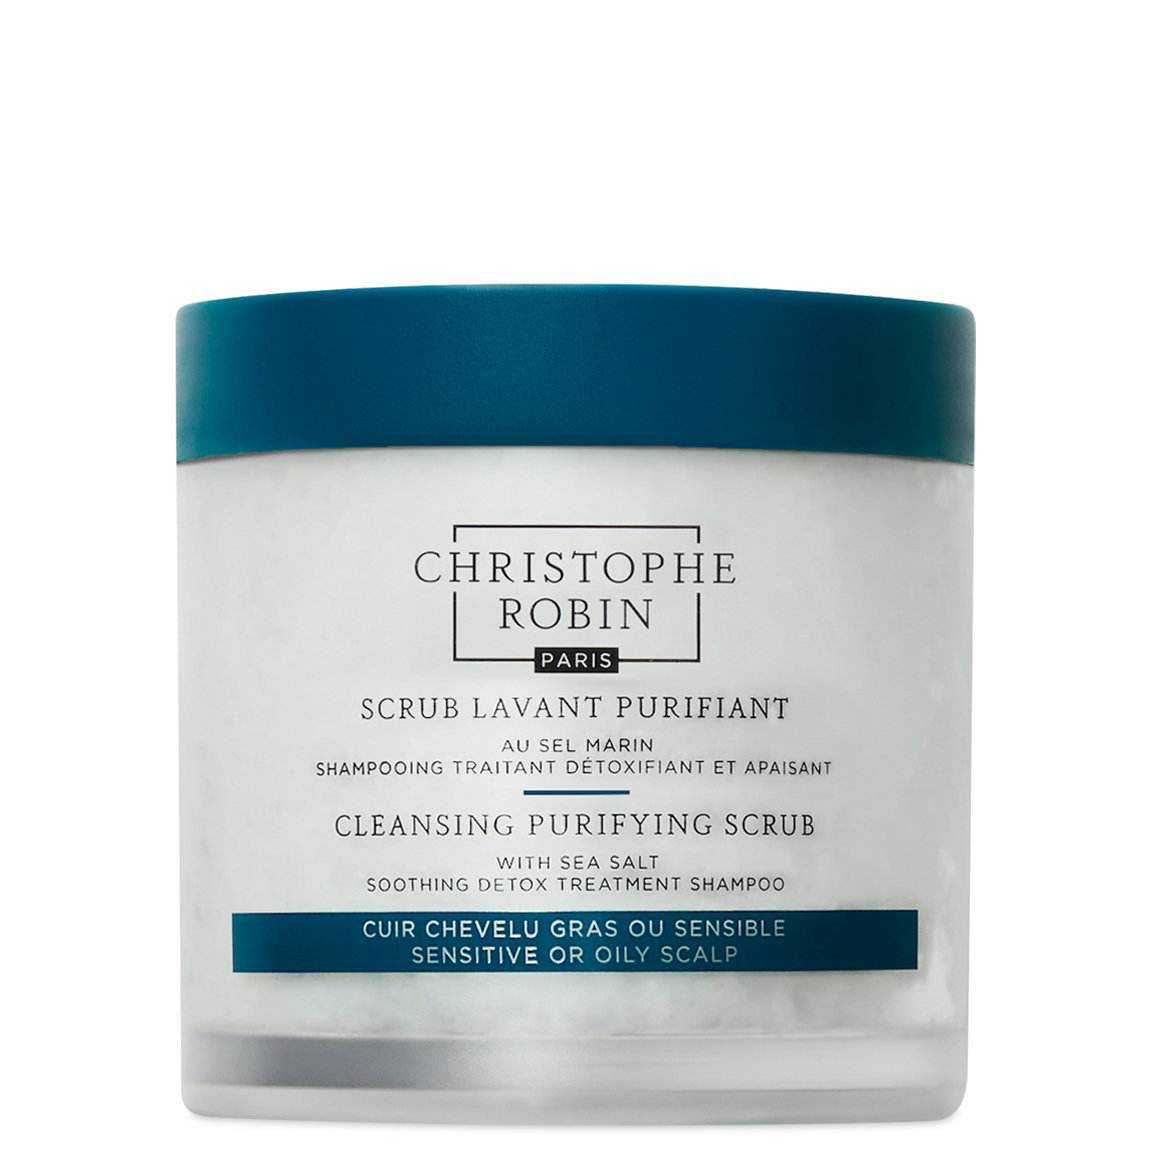 Christophe Robin Cleansing Purifying Scrub with Sea Salt 250 ml alternative view 1 - product swatch.